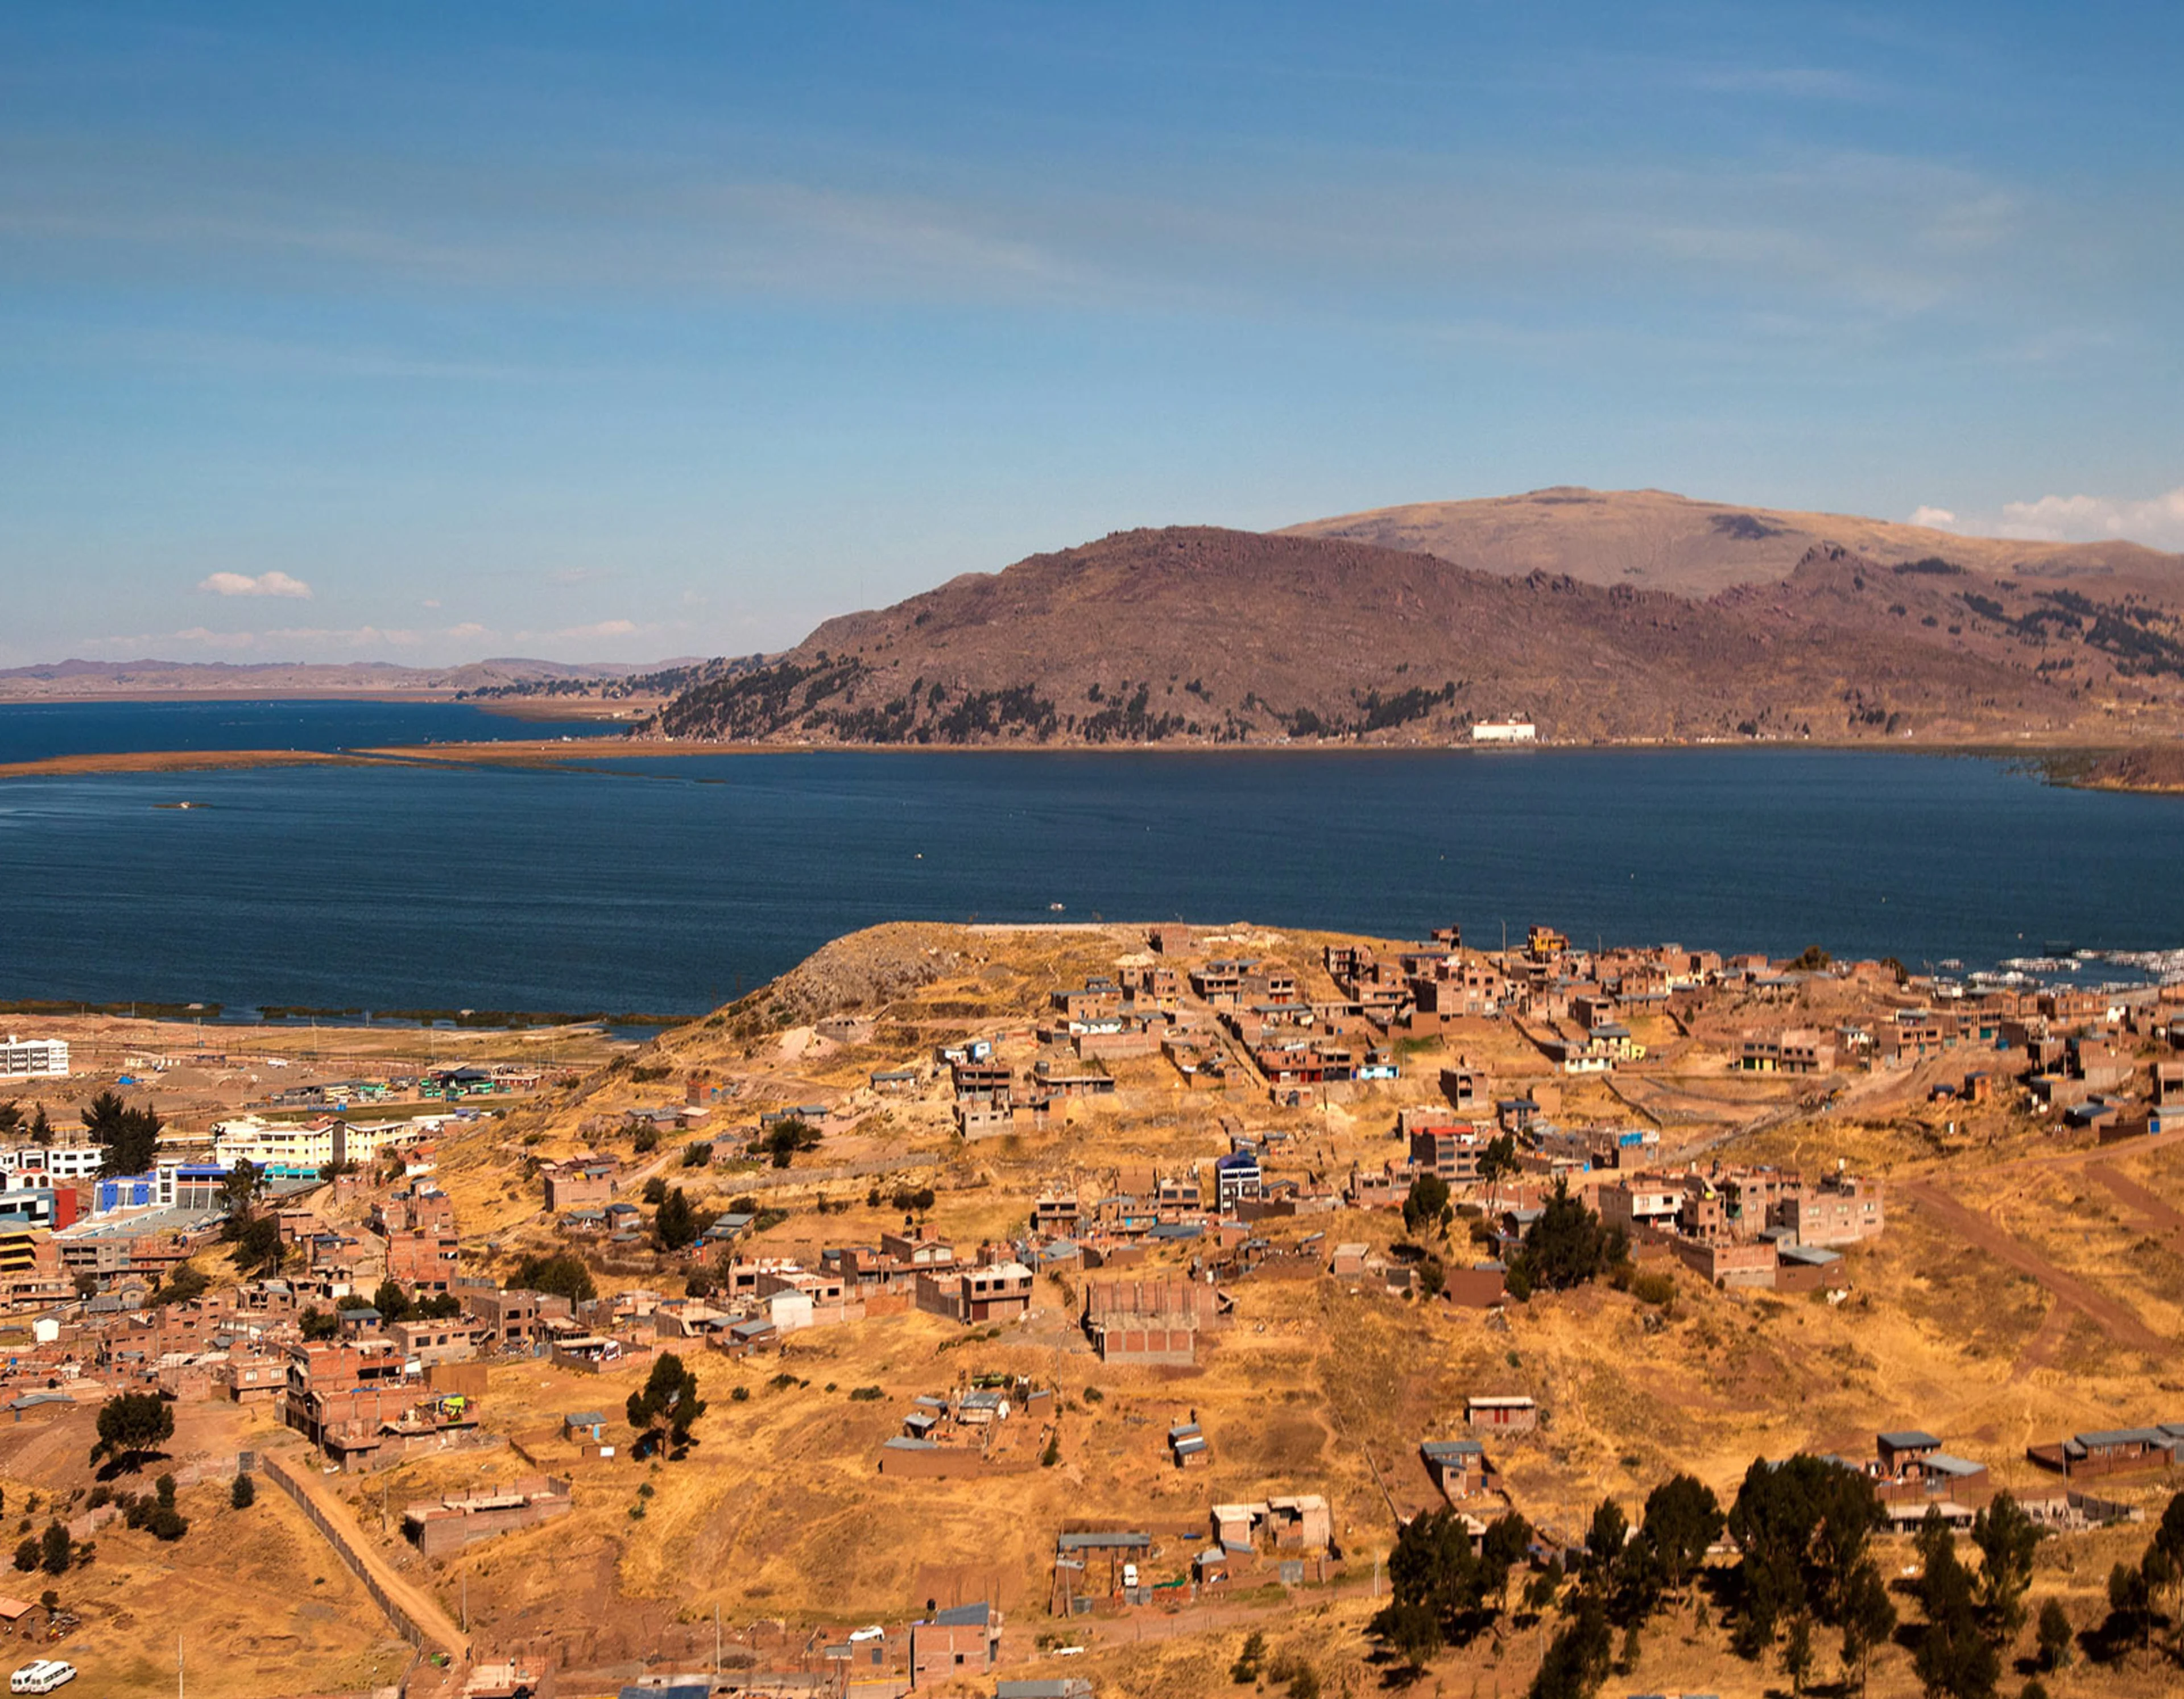 Houses in desert like surrounding in front of Lake Titicaca.